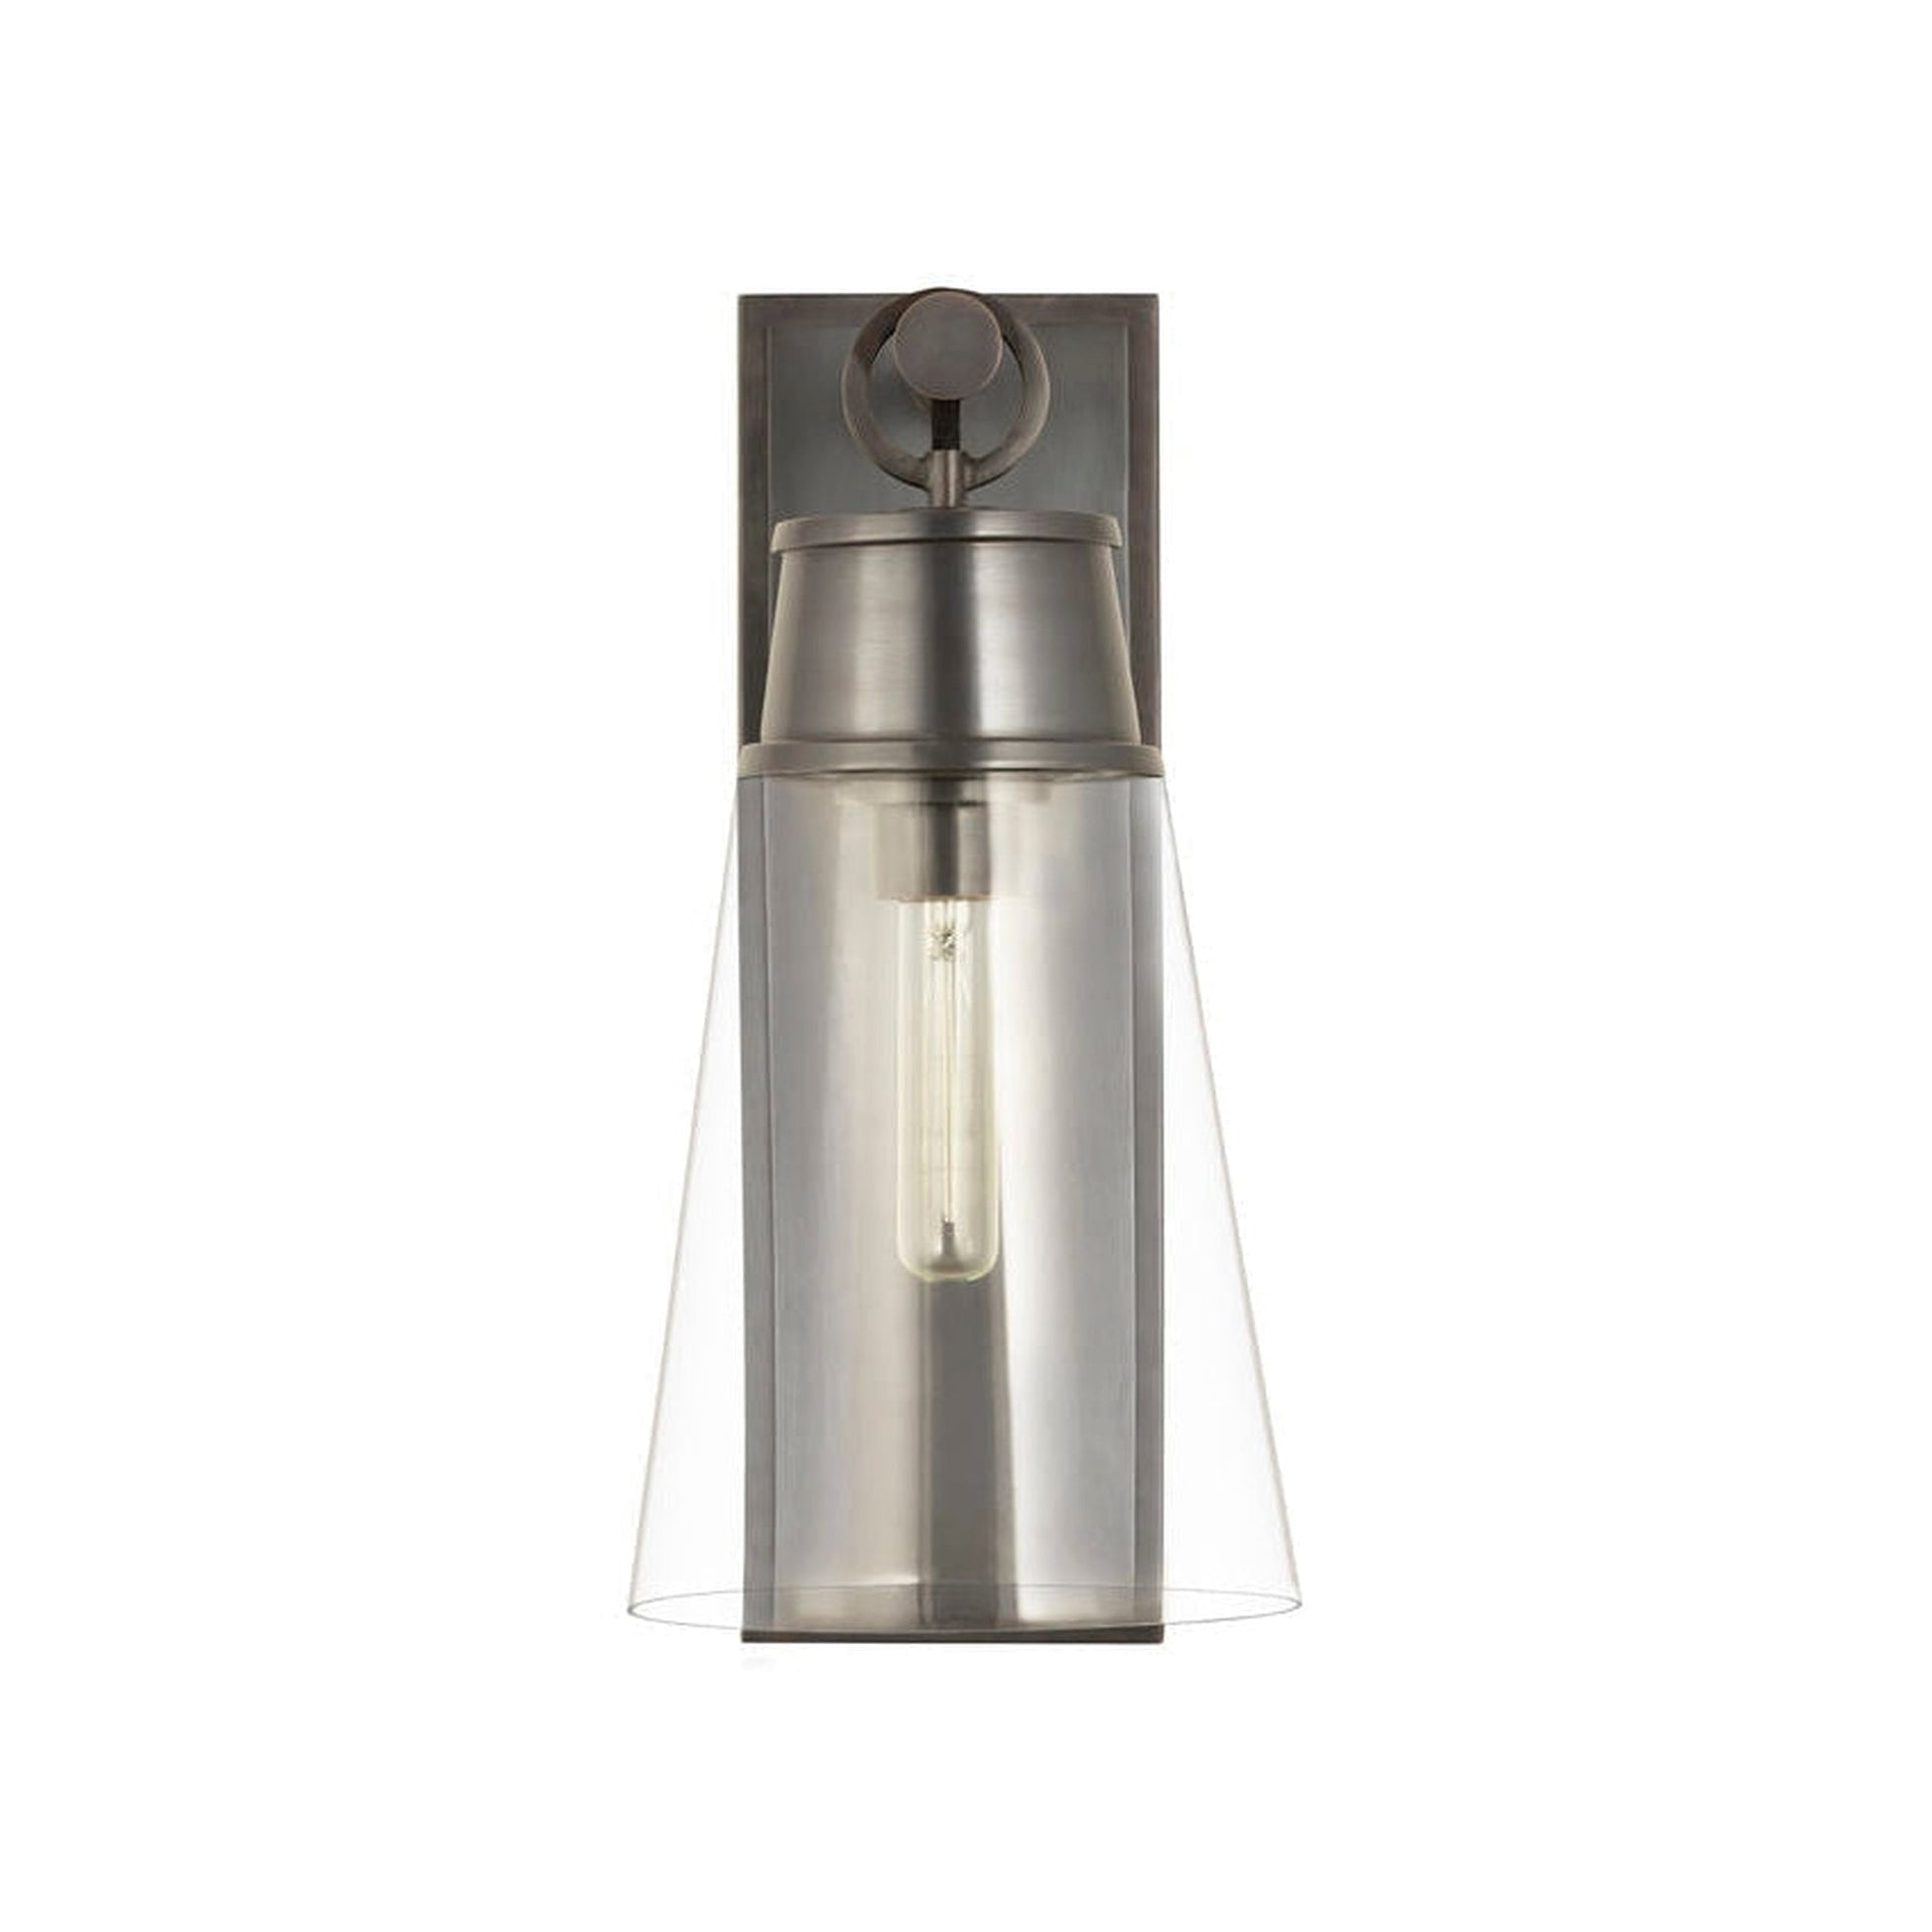 Z-Lite Wentworth 8" 1-Light Plated Bronze Wall Sconce With Clear Glass Shade